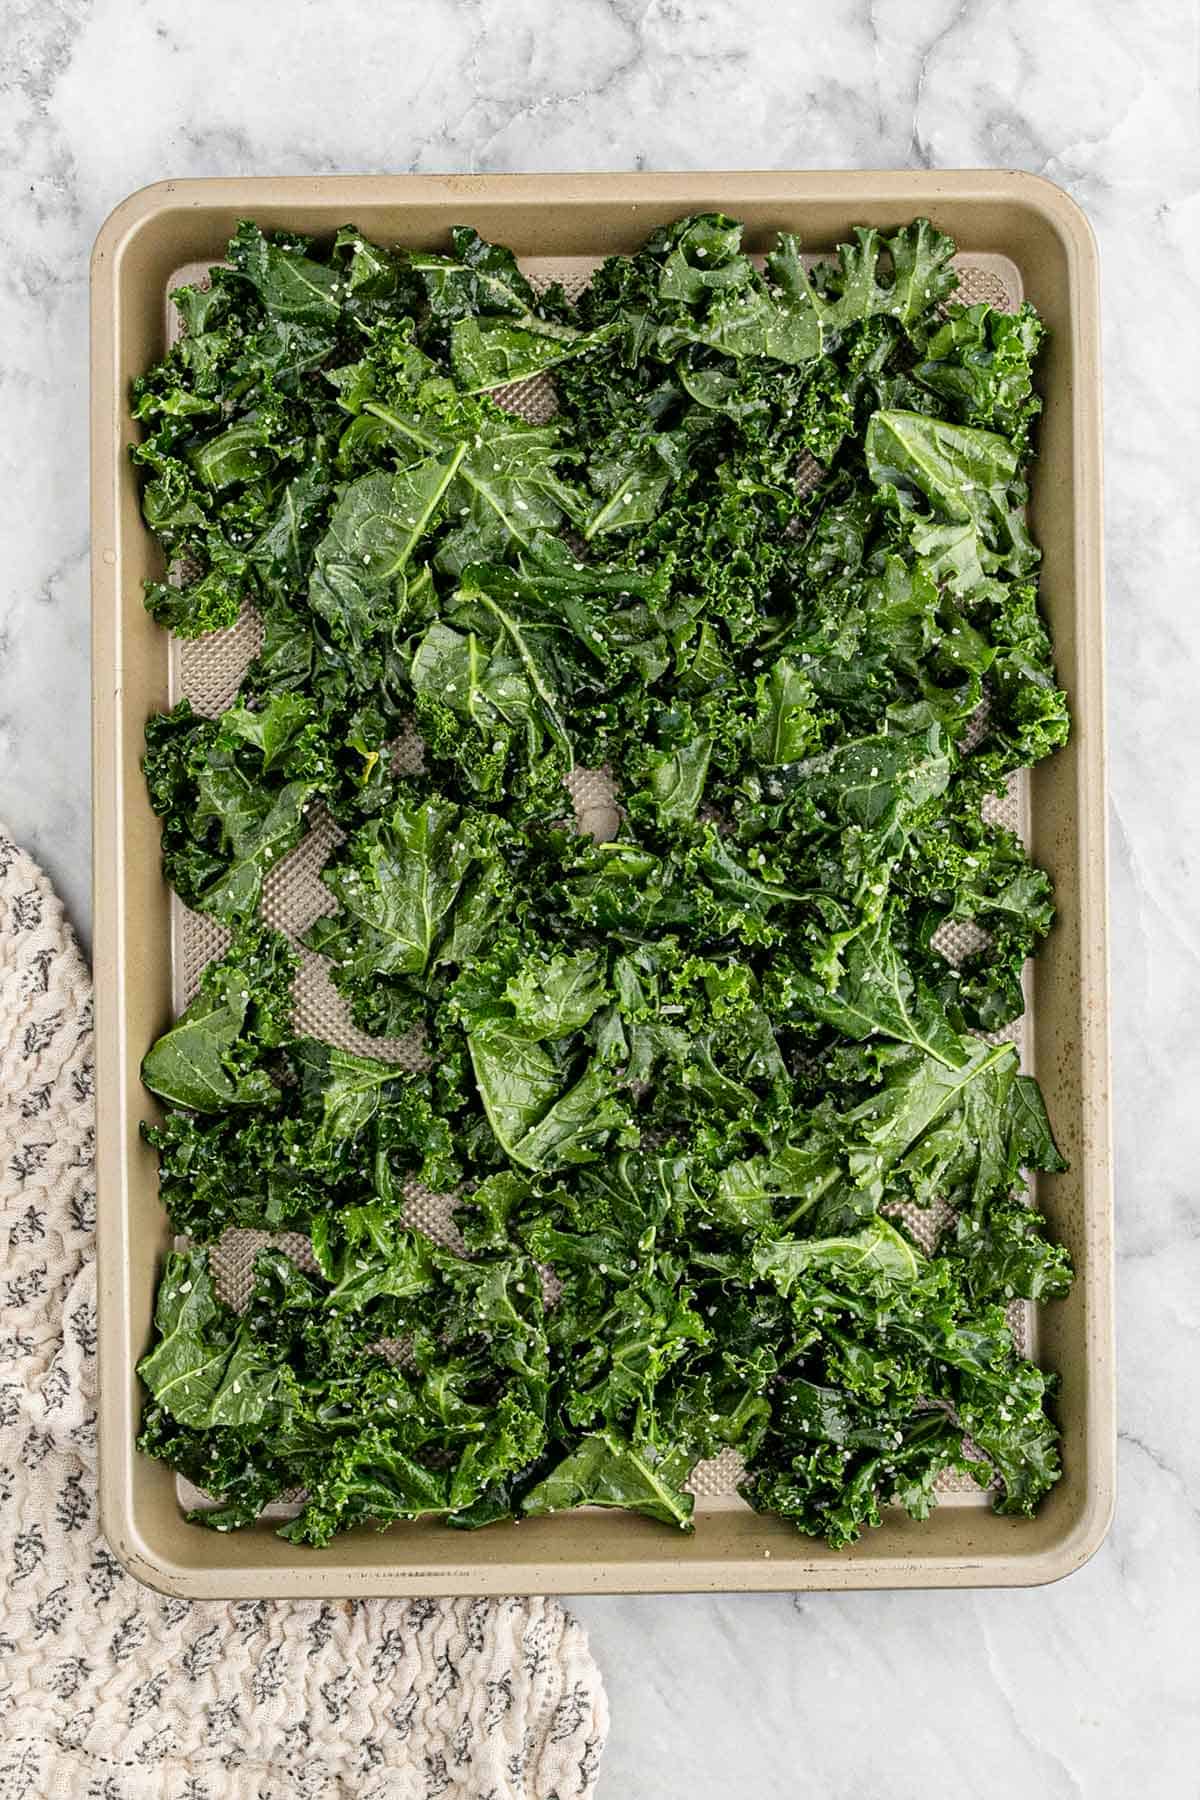 The kale spread out onto a baking tray.